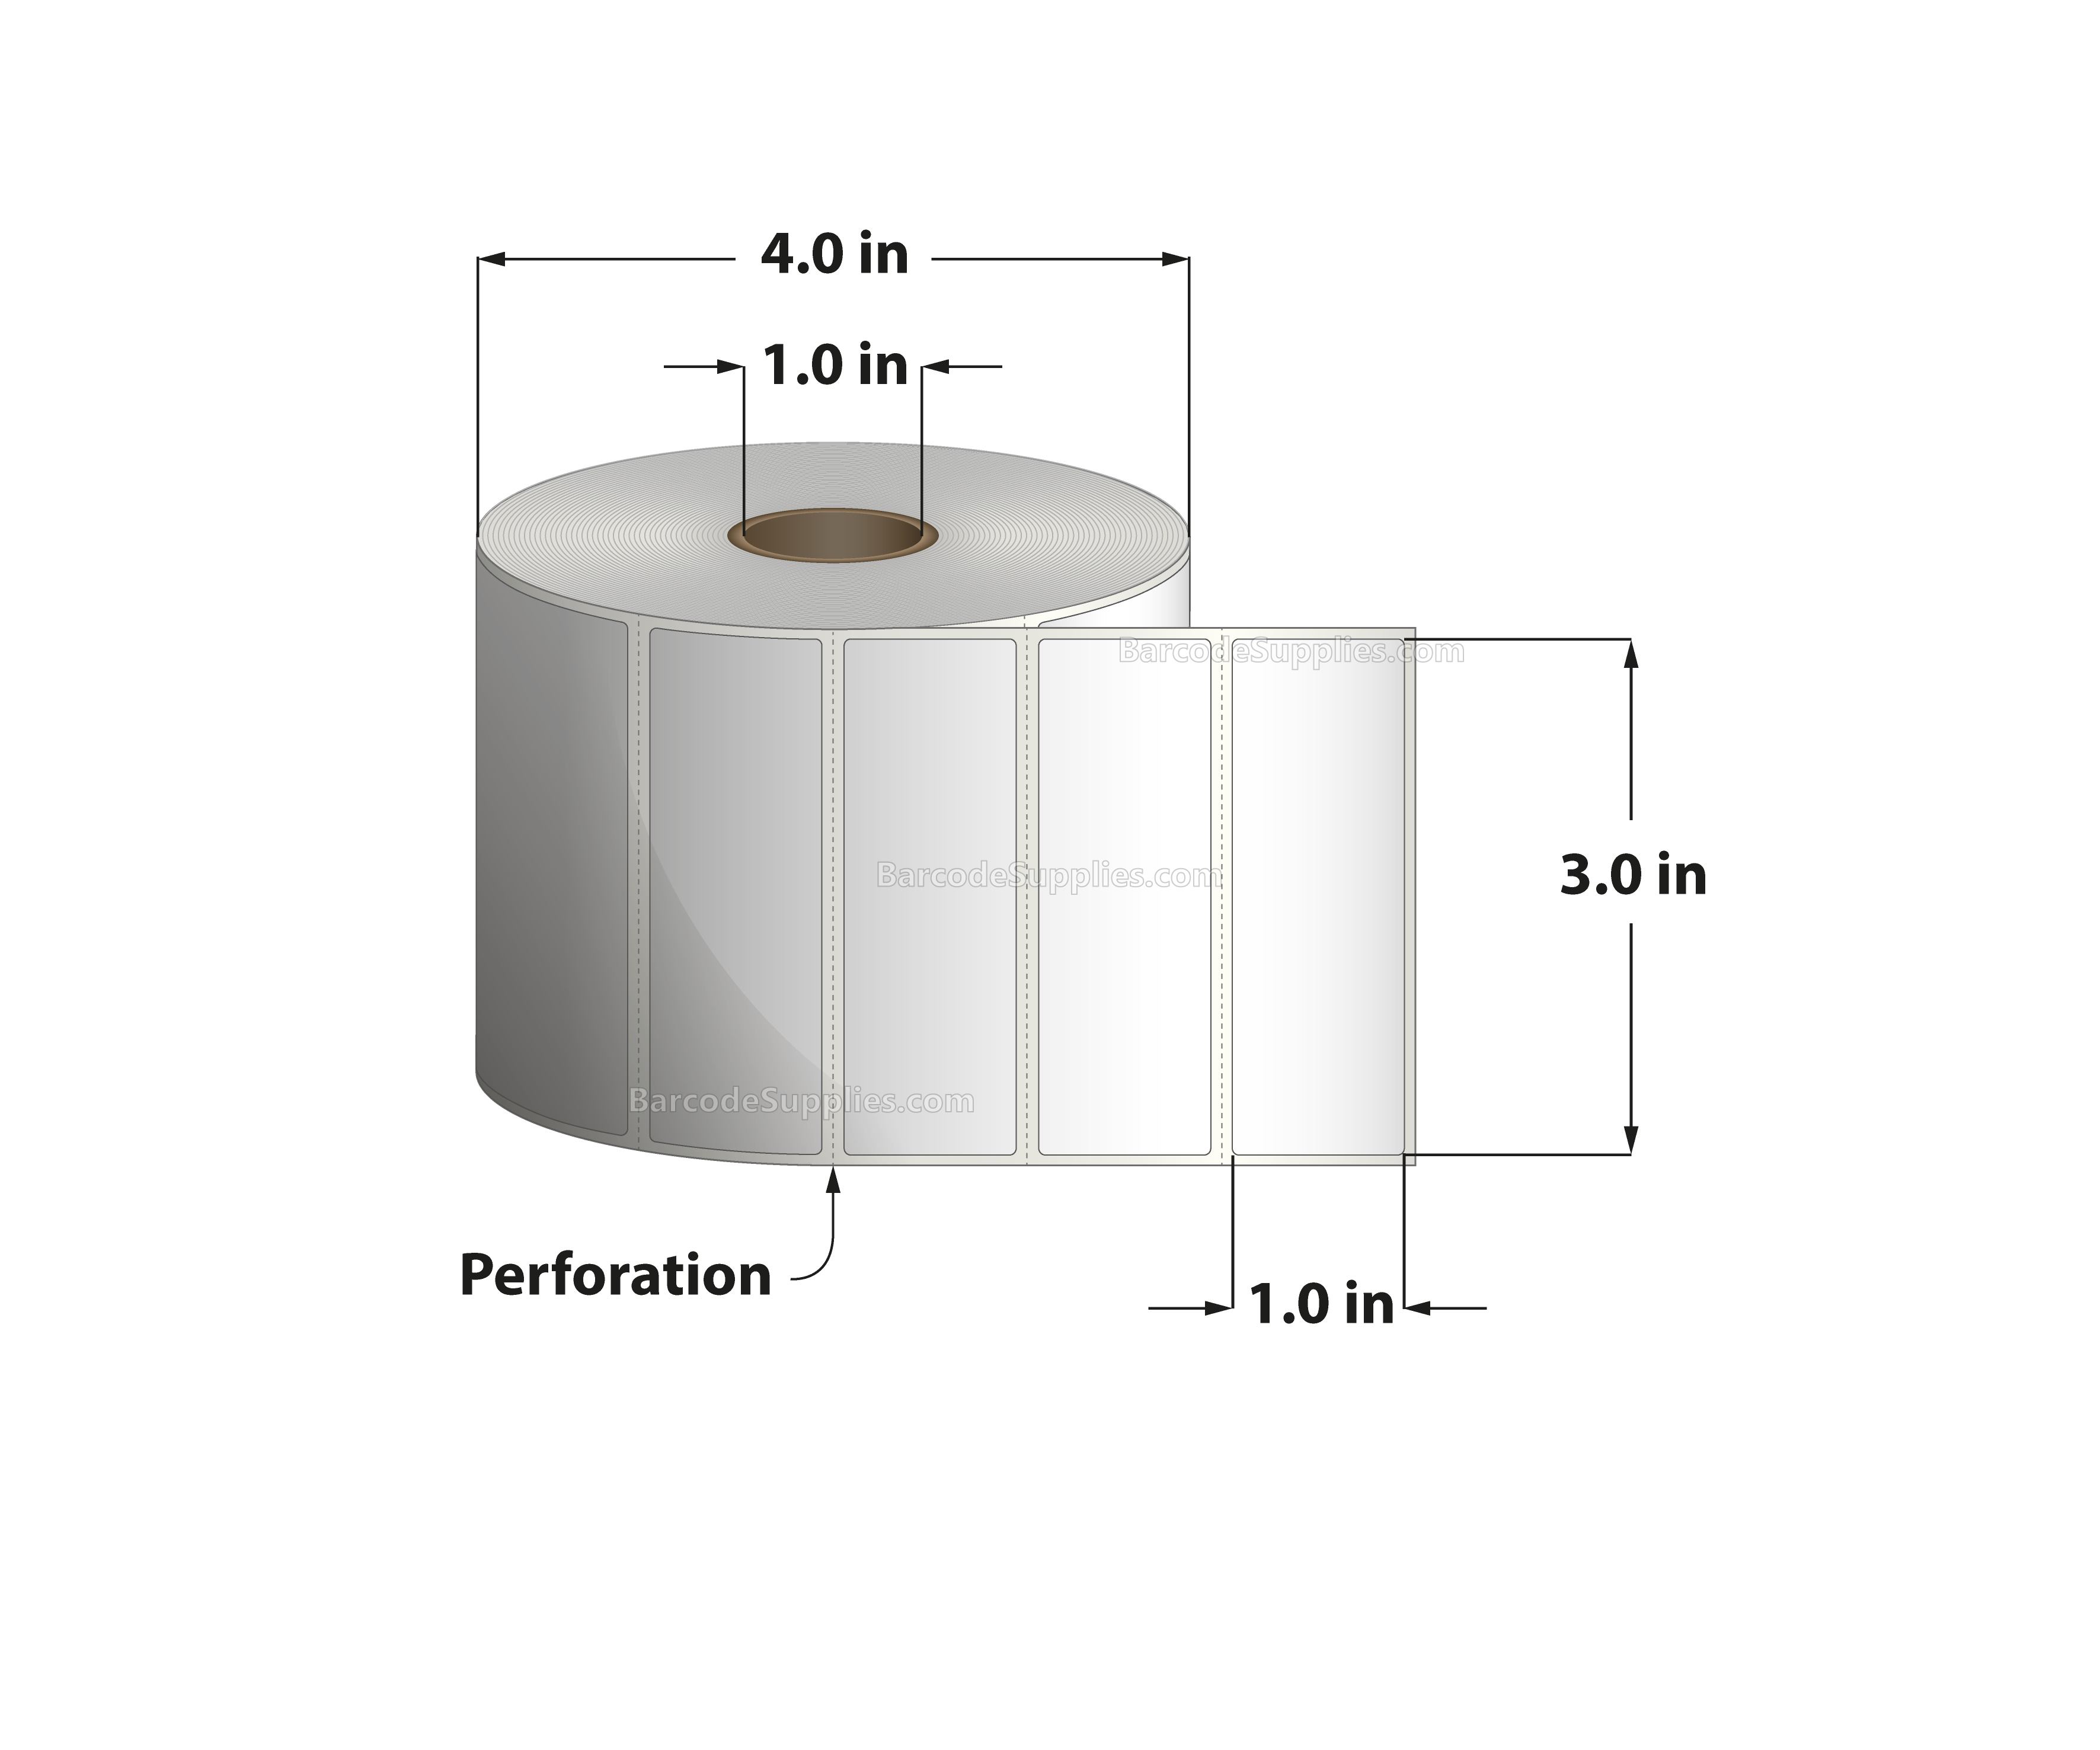 3 x 1 Direct Thermal White Labels With Acrylic Adhesive - Perforated - 1375 Labels Per Roll - Carton Of 12 Rolls - 16500 Labels Total - MPN: RD-3-1-1375-1 - BarcodeSource, Inc.